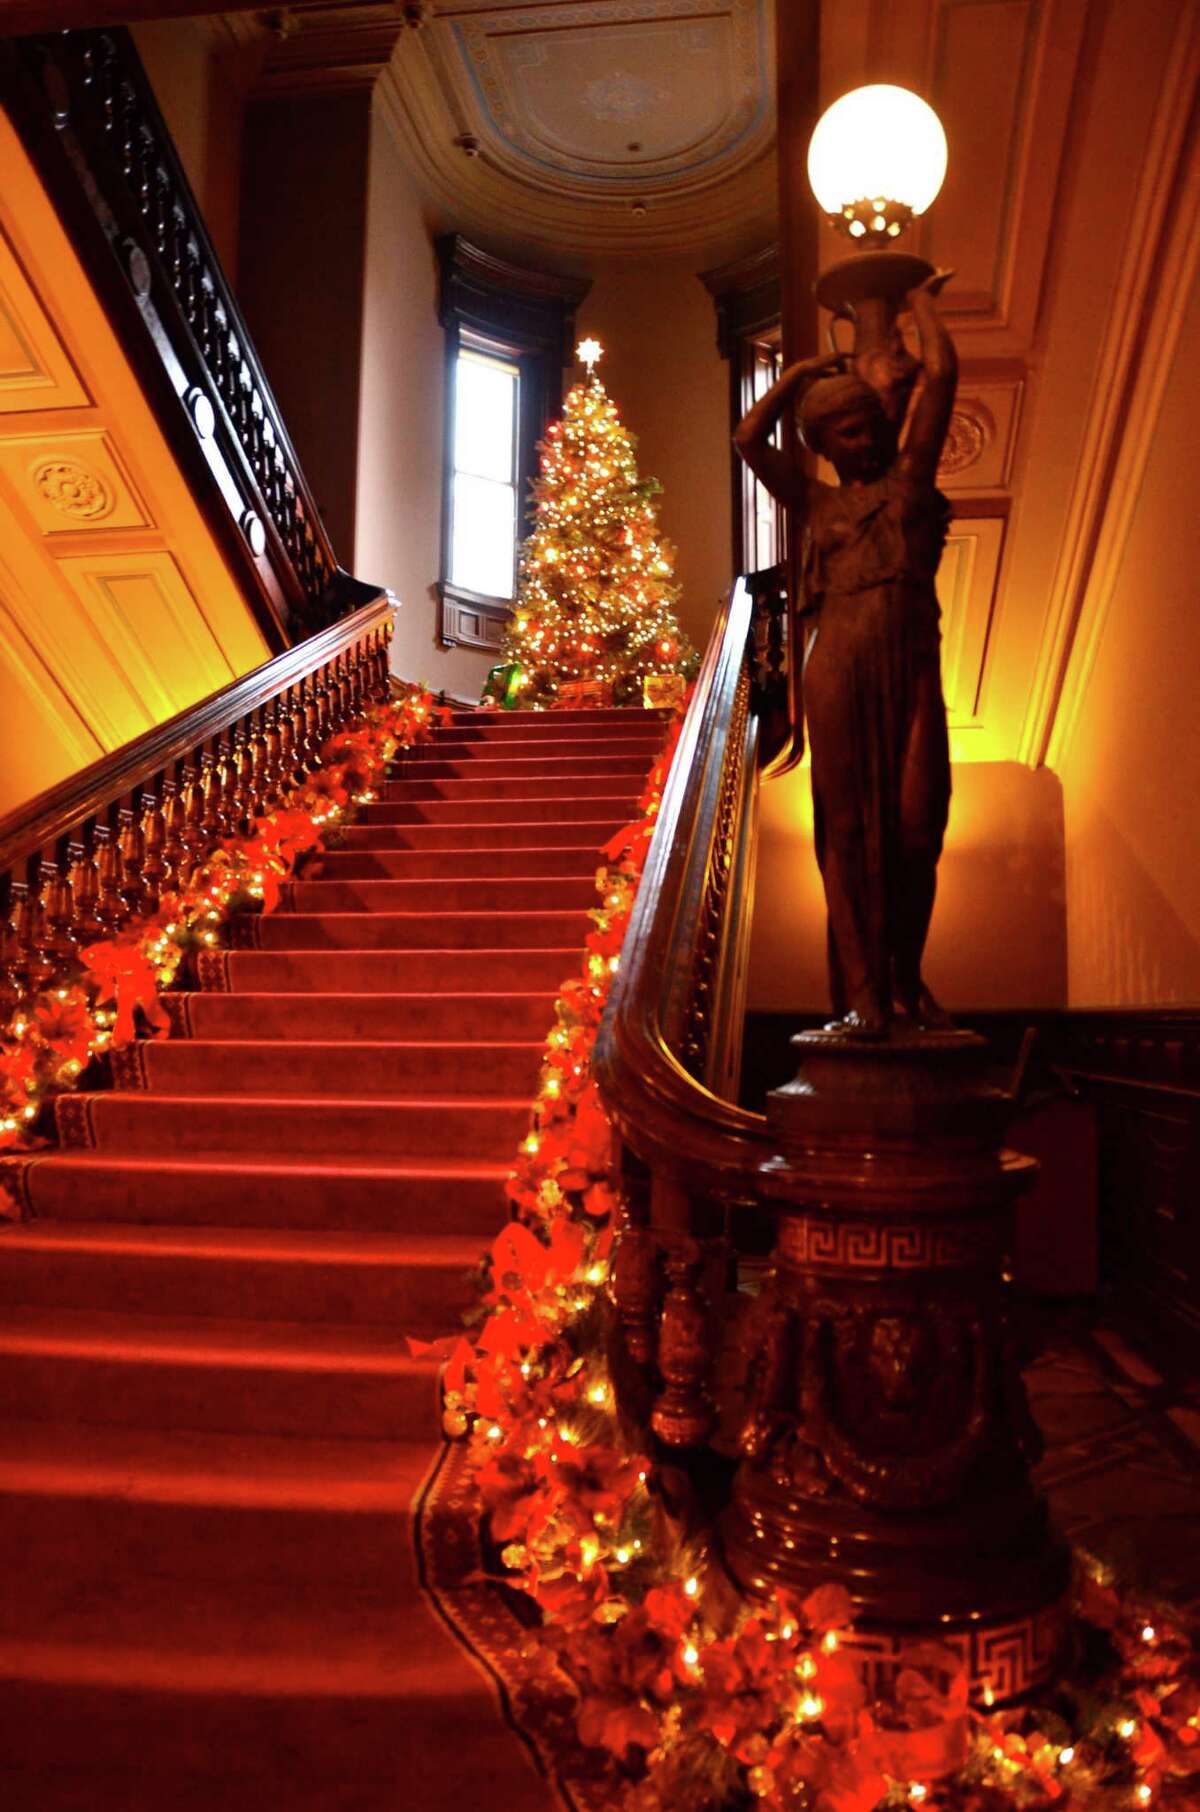 Leave the bustle behind for 'Grand Holiday' at the mansion